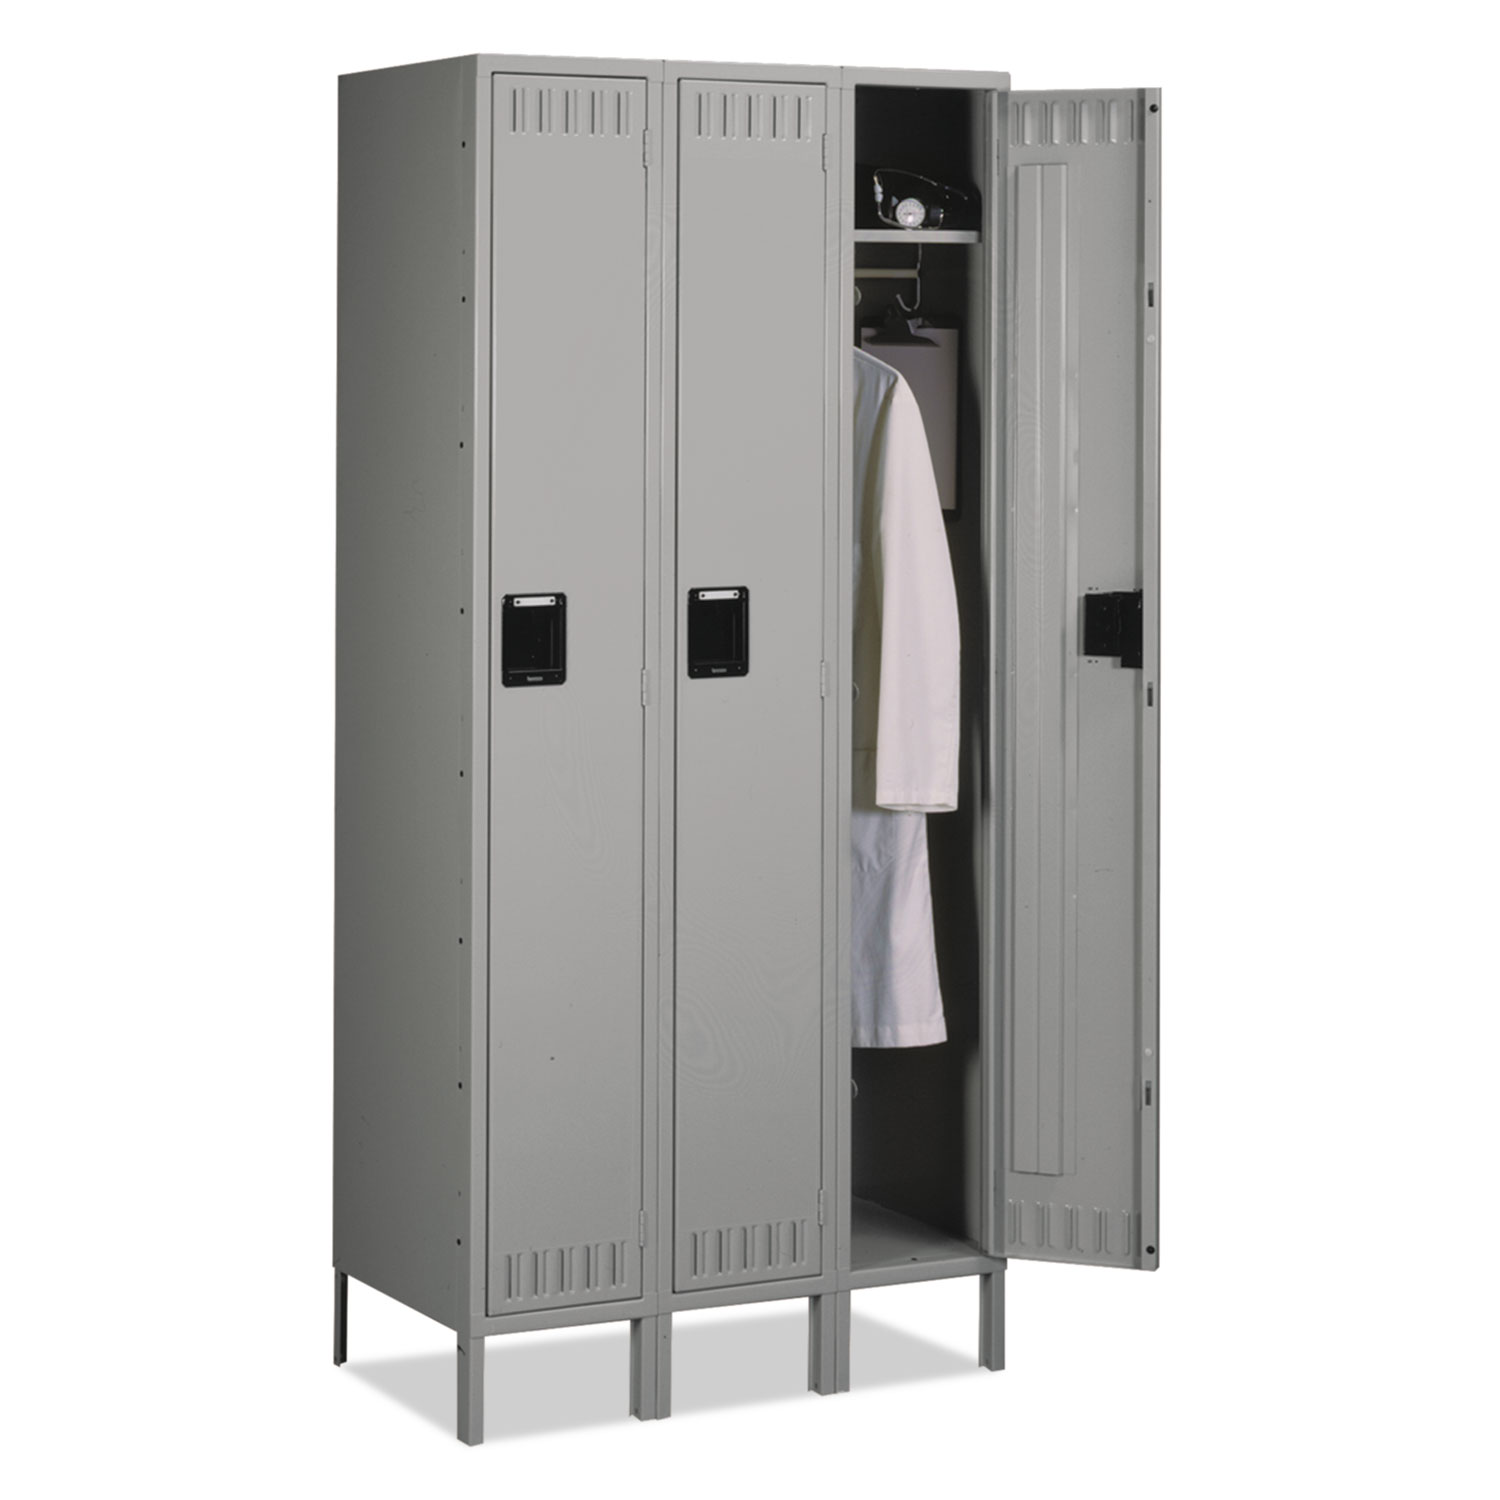 78h, - and Coat Equipment Hat with x Shelves Office Legs, Locker 18d Golden x 36w Single-Tier Medium Three Lockers Isles with Gray Rods,